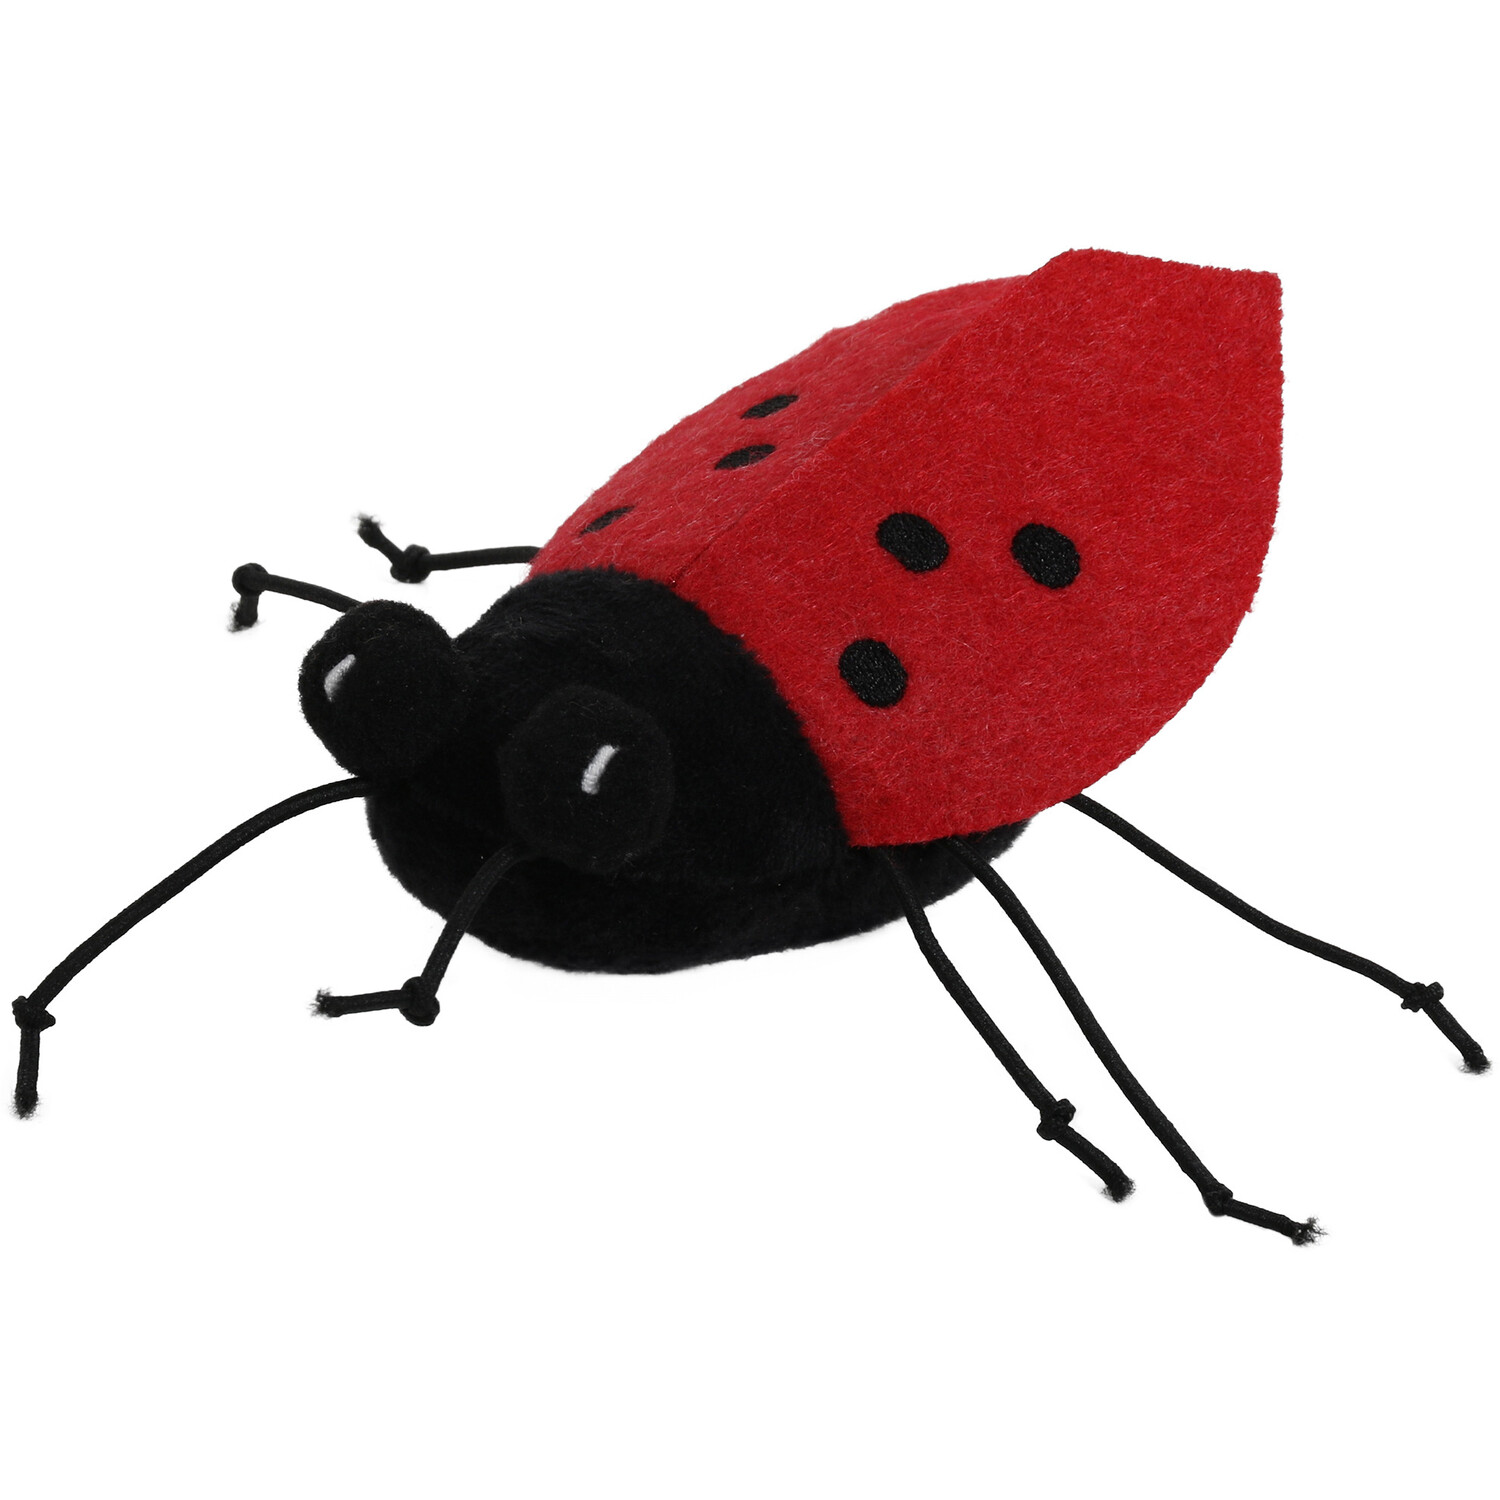 Buzzing Insect Cat Toy - Red Image 1